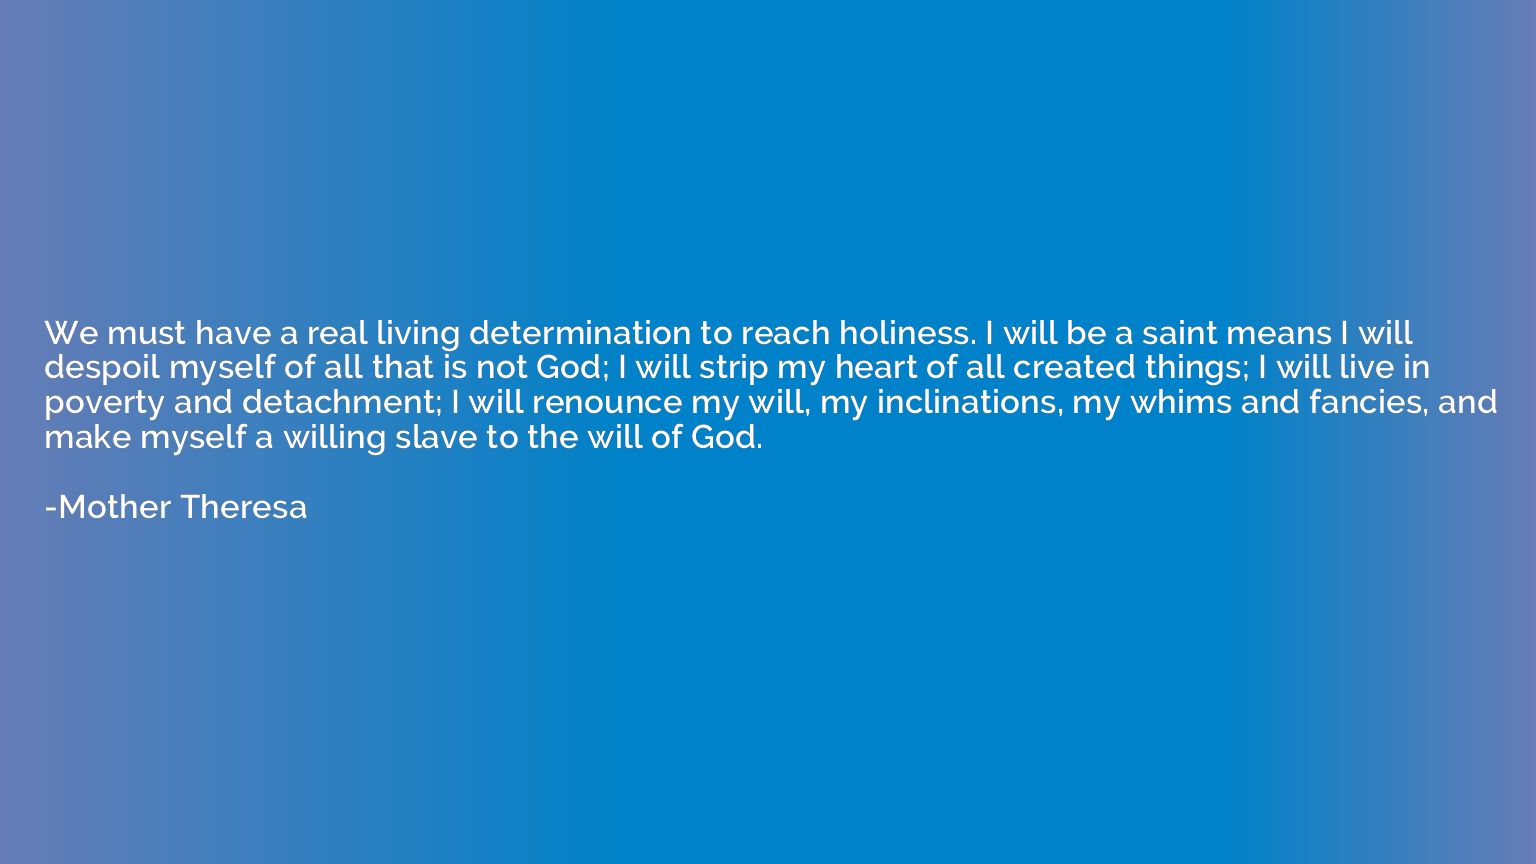 We must have a real living determination to reach holiness. 